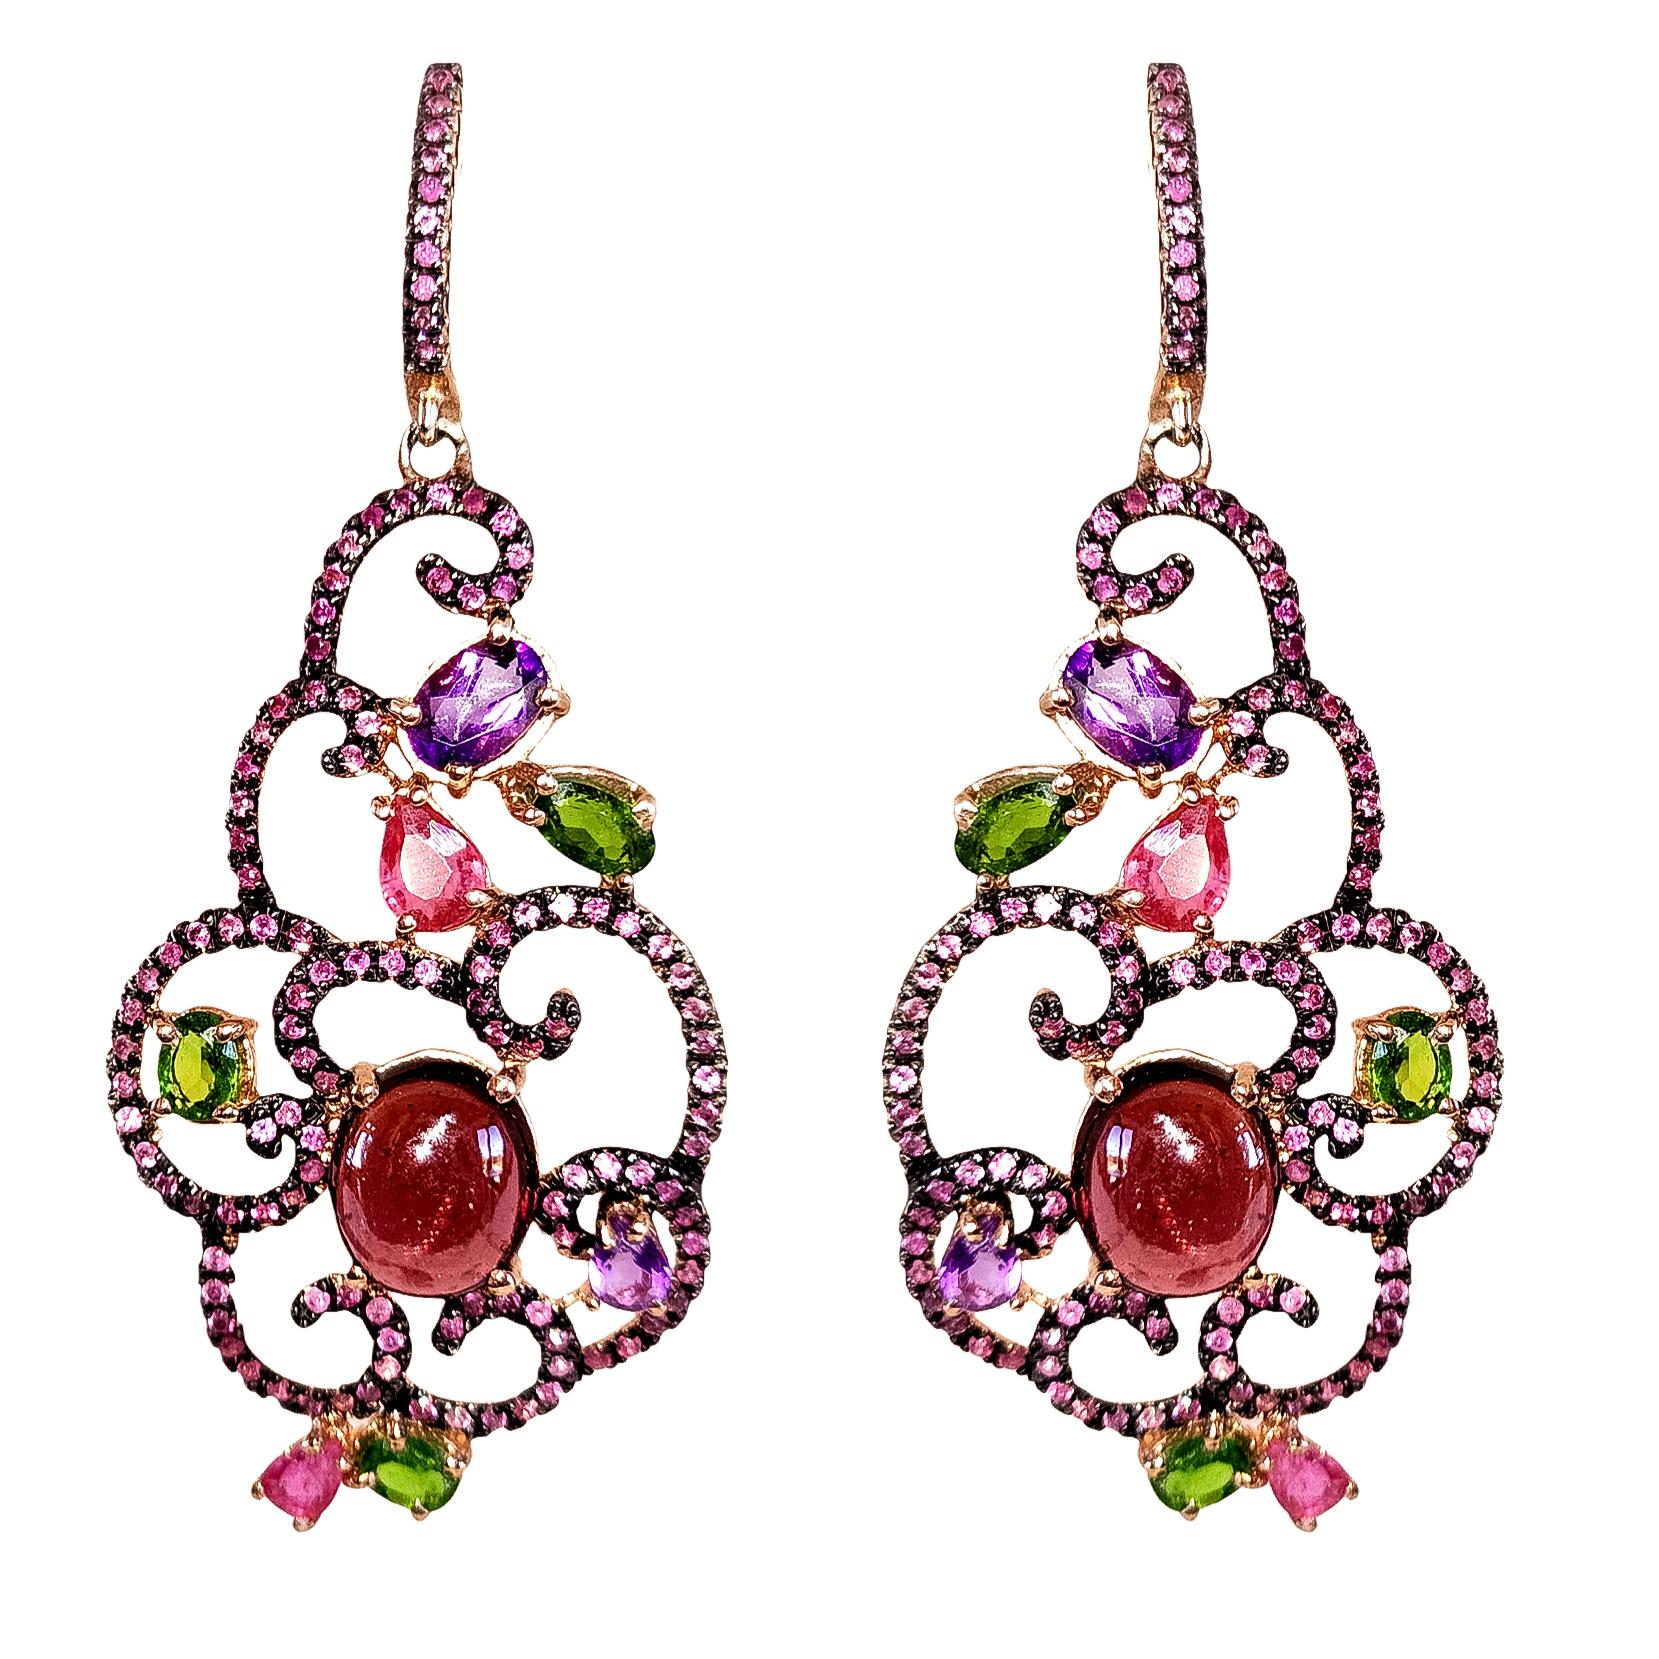 One pair of Post and Lever Back Drop Earrings featuring a Deliciously Sweet Confectionery of Colored Gemstones. These festive Earrings are an appropriate accent for four season wear.  Semi Hoops and Large dangles of brilliant swirls of color feature